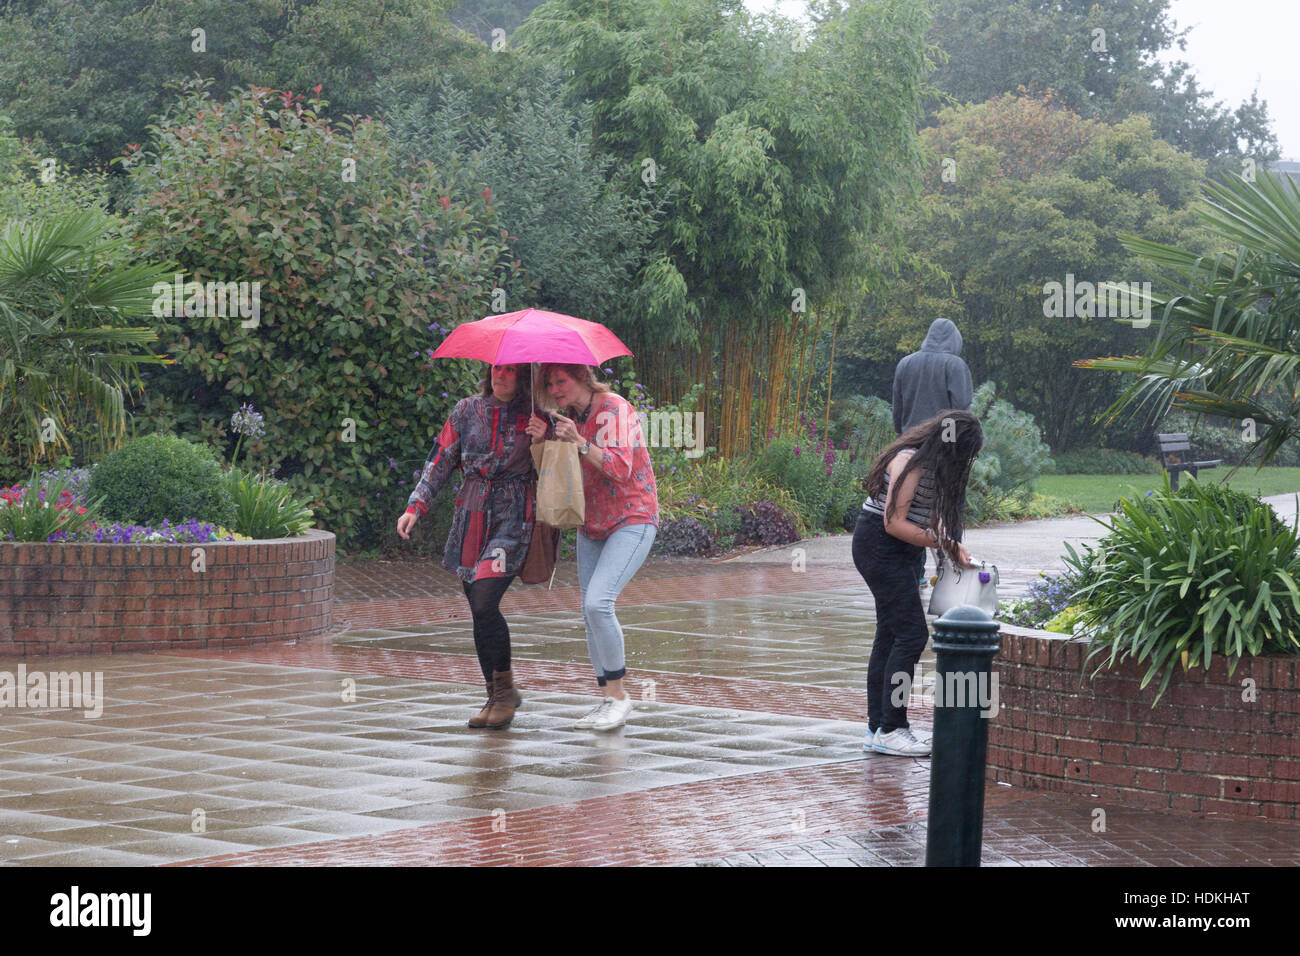 Two women share an umbrella walking through a park. Another woman is getting wet without an umbrella as she searches her handbag Stock Photo